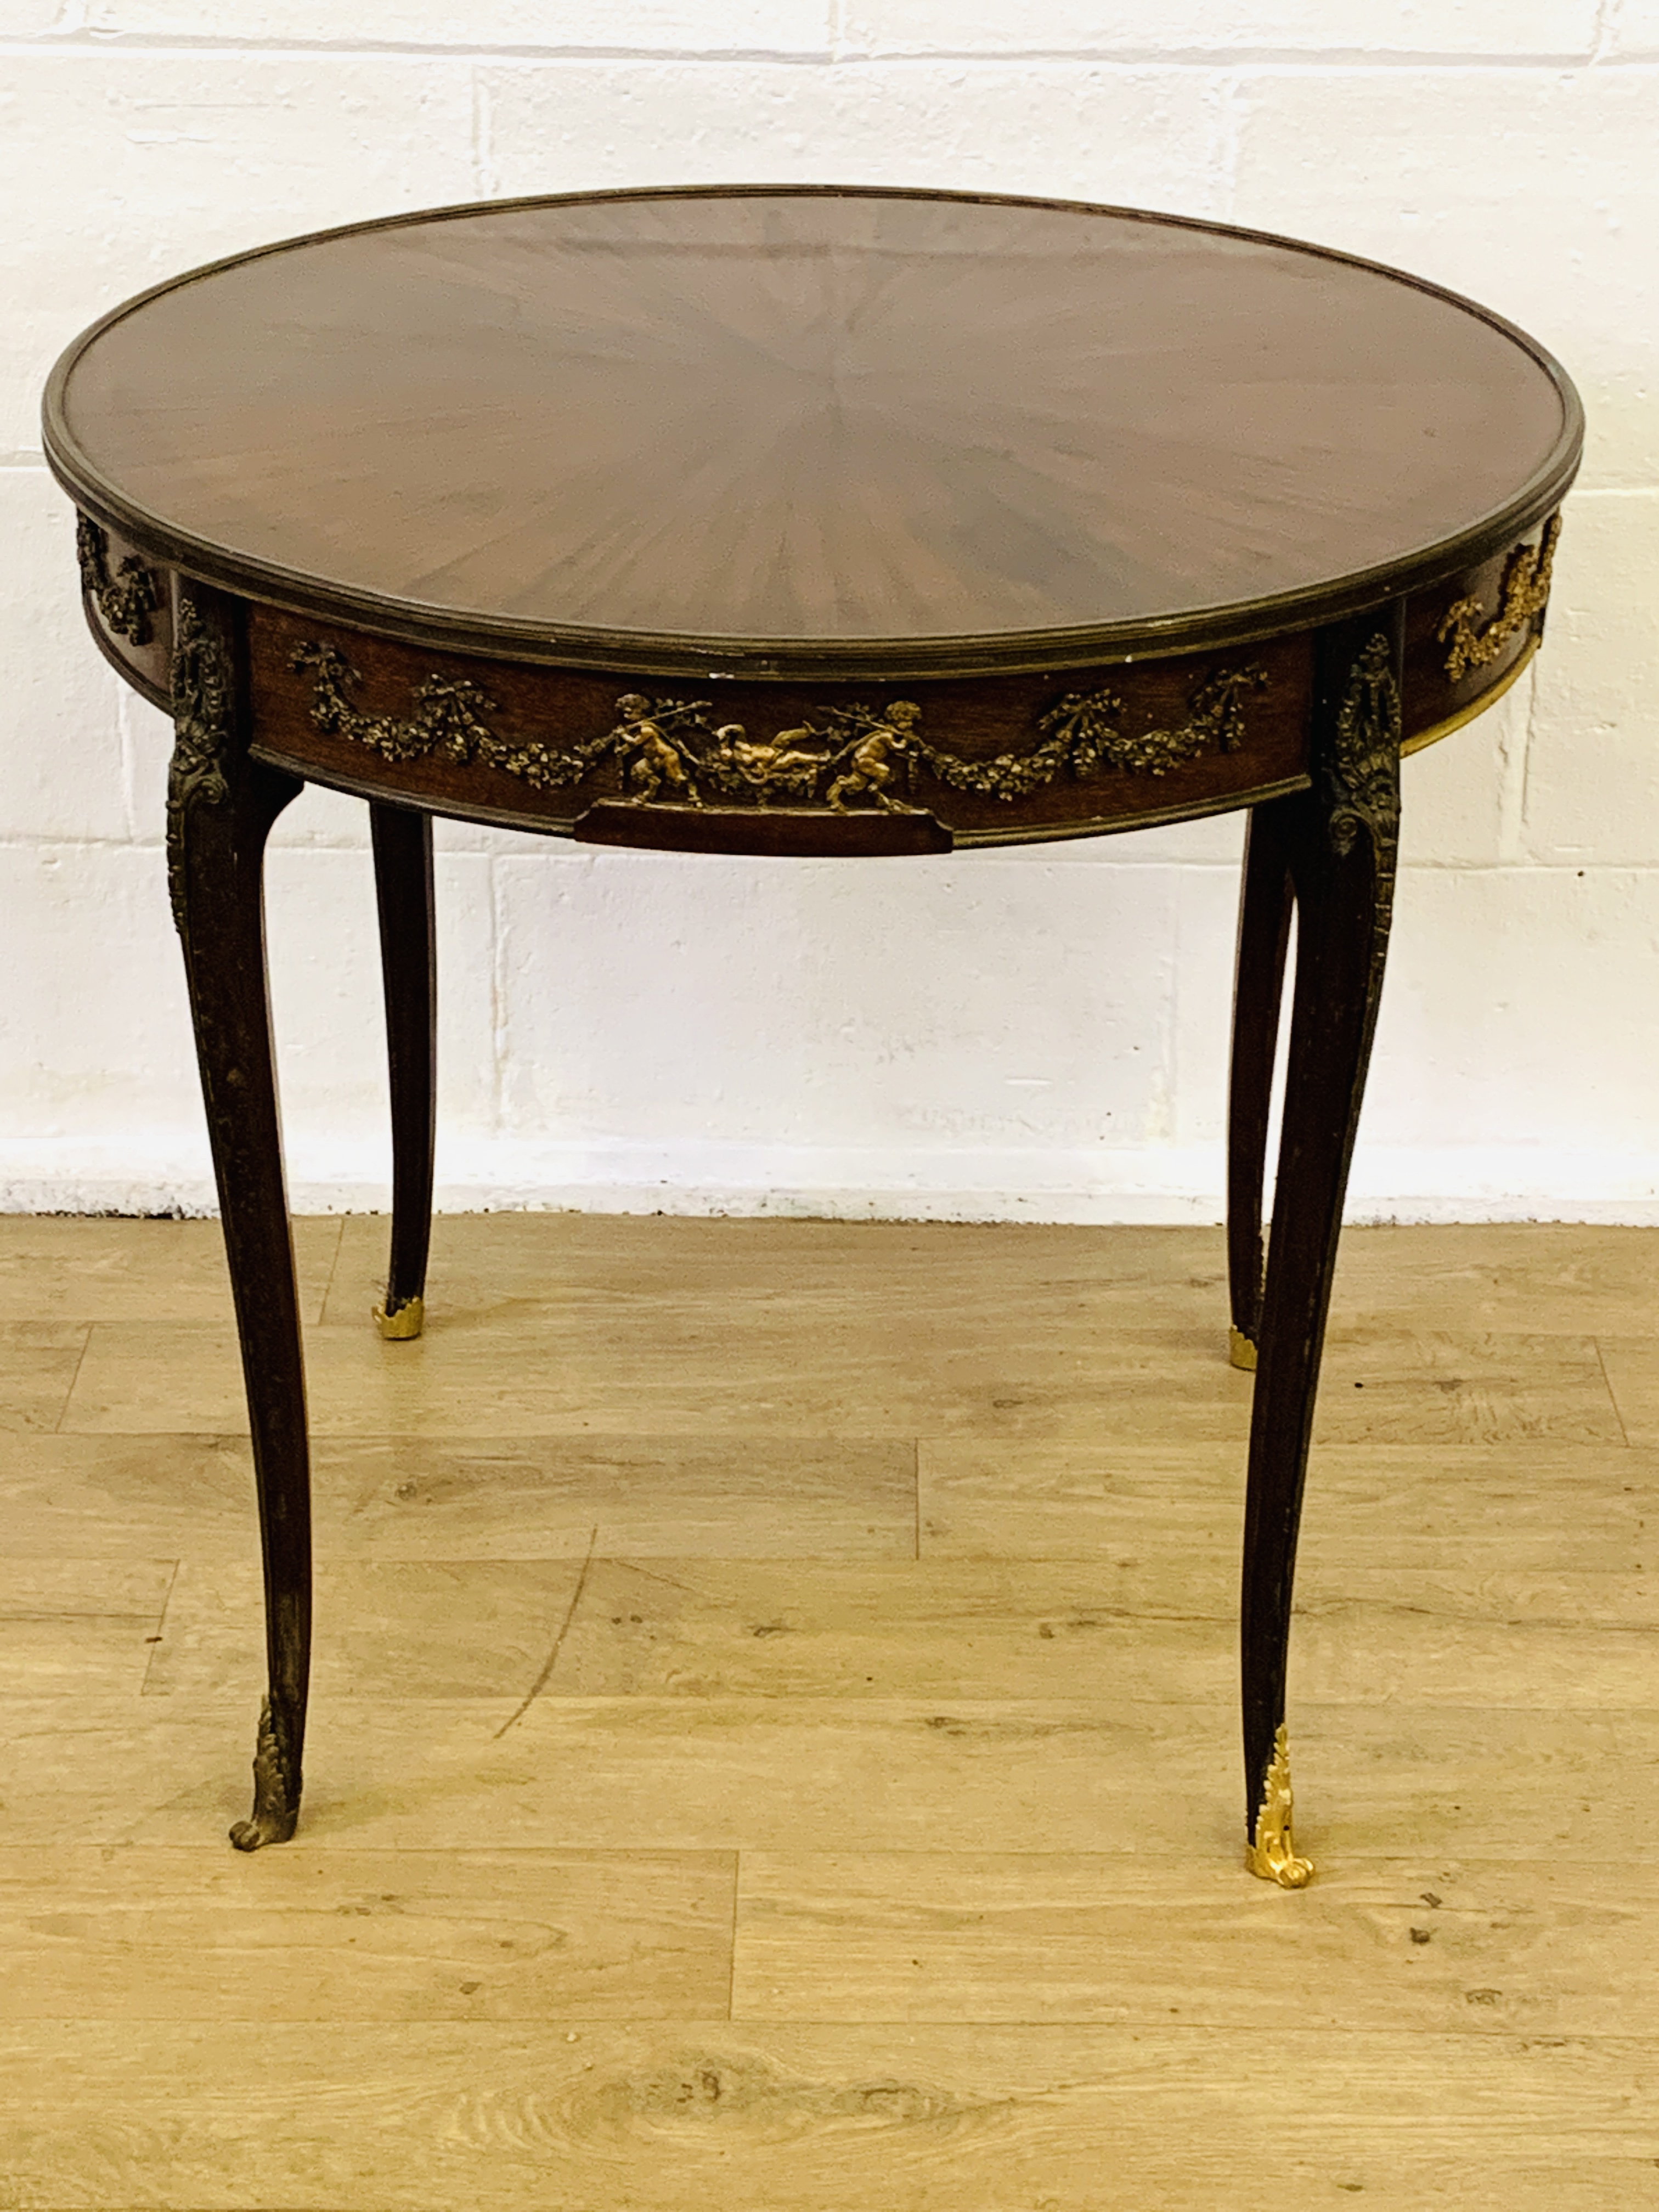 French empire style display table - Image 4 of 8